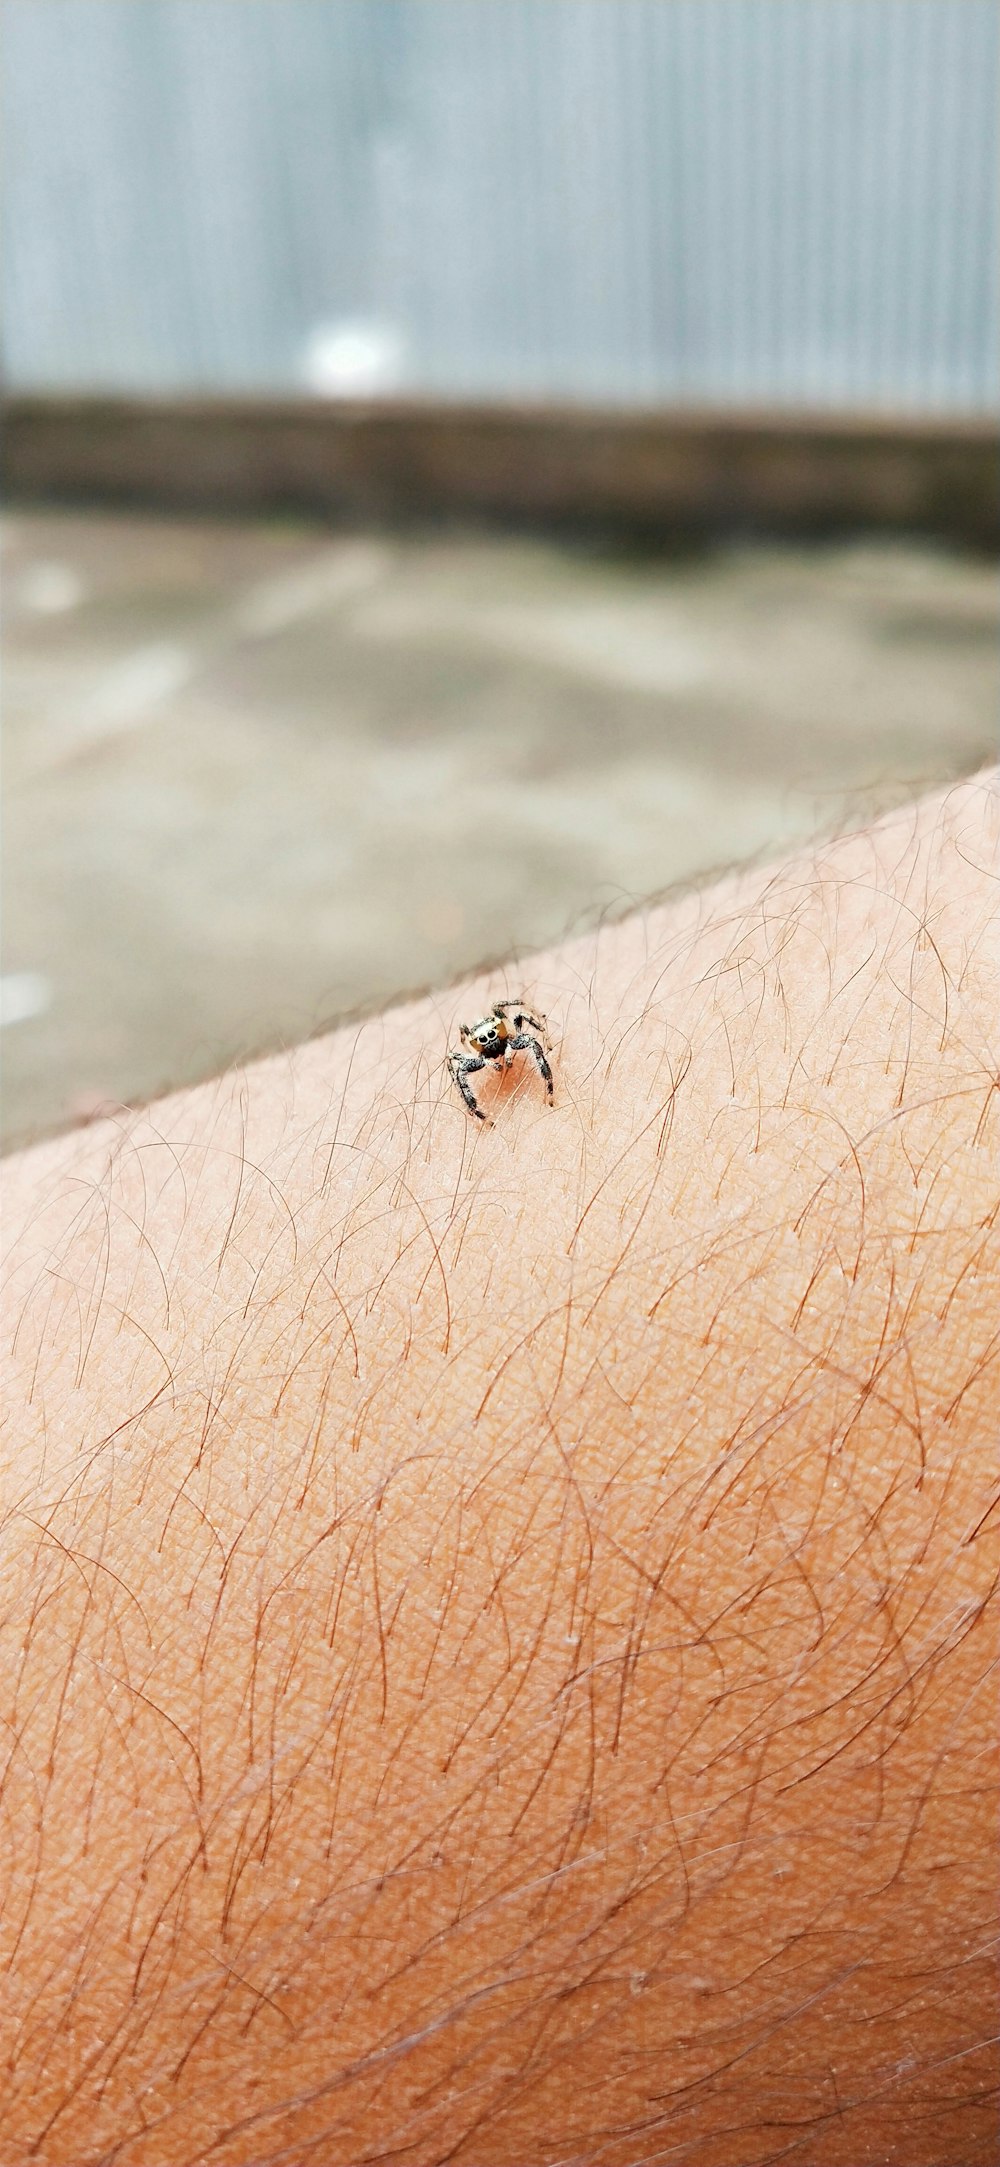 a small insect sitting on the arm of a person